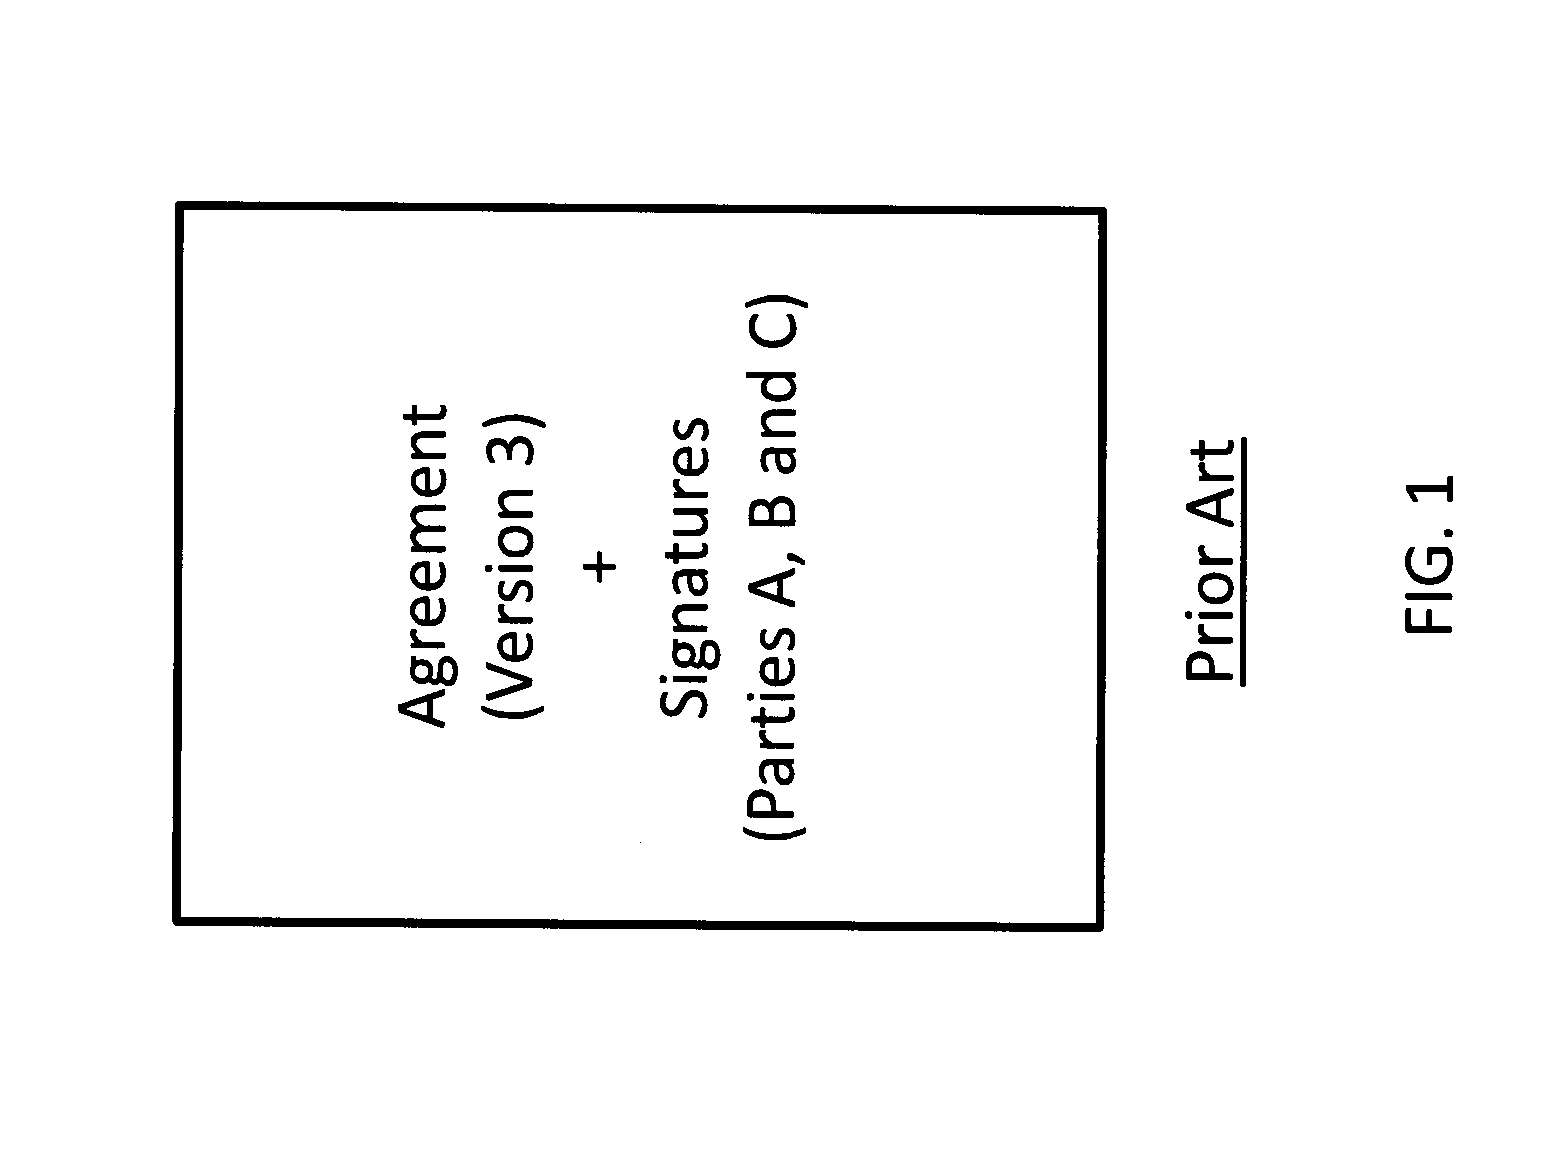 Method of creating and managing signature pages